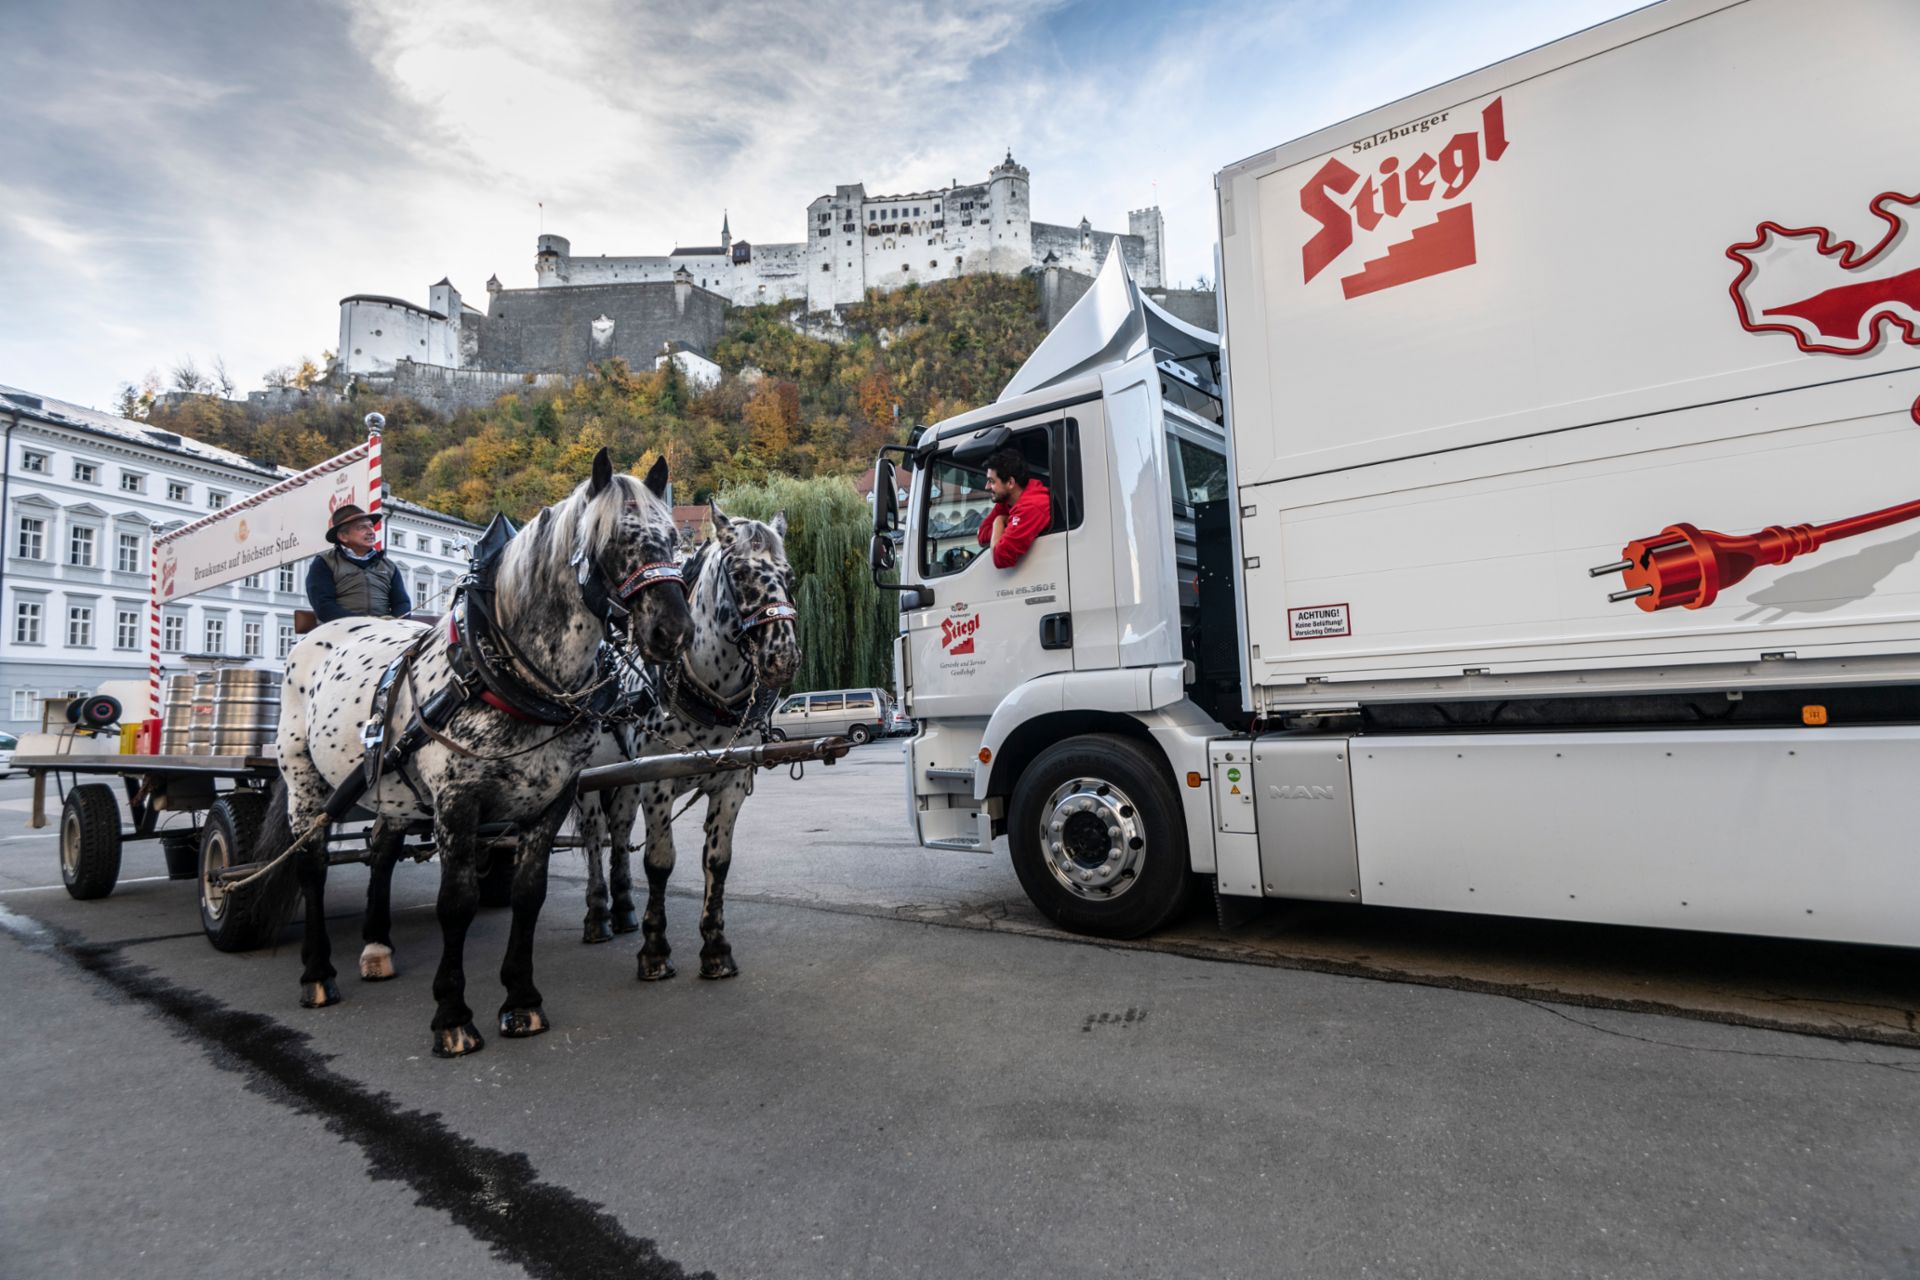 The eTruck field test at Stiegl perfectly merges tradition and modernity.
                 